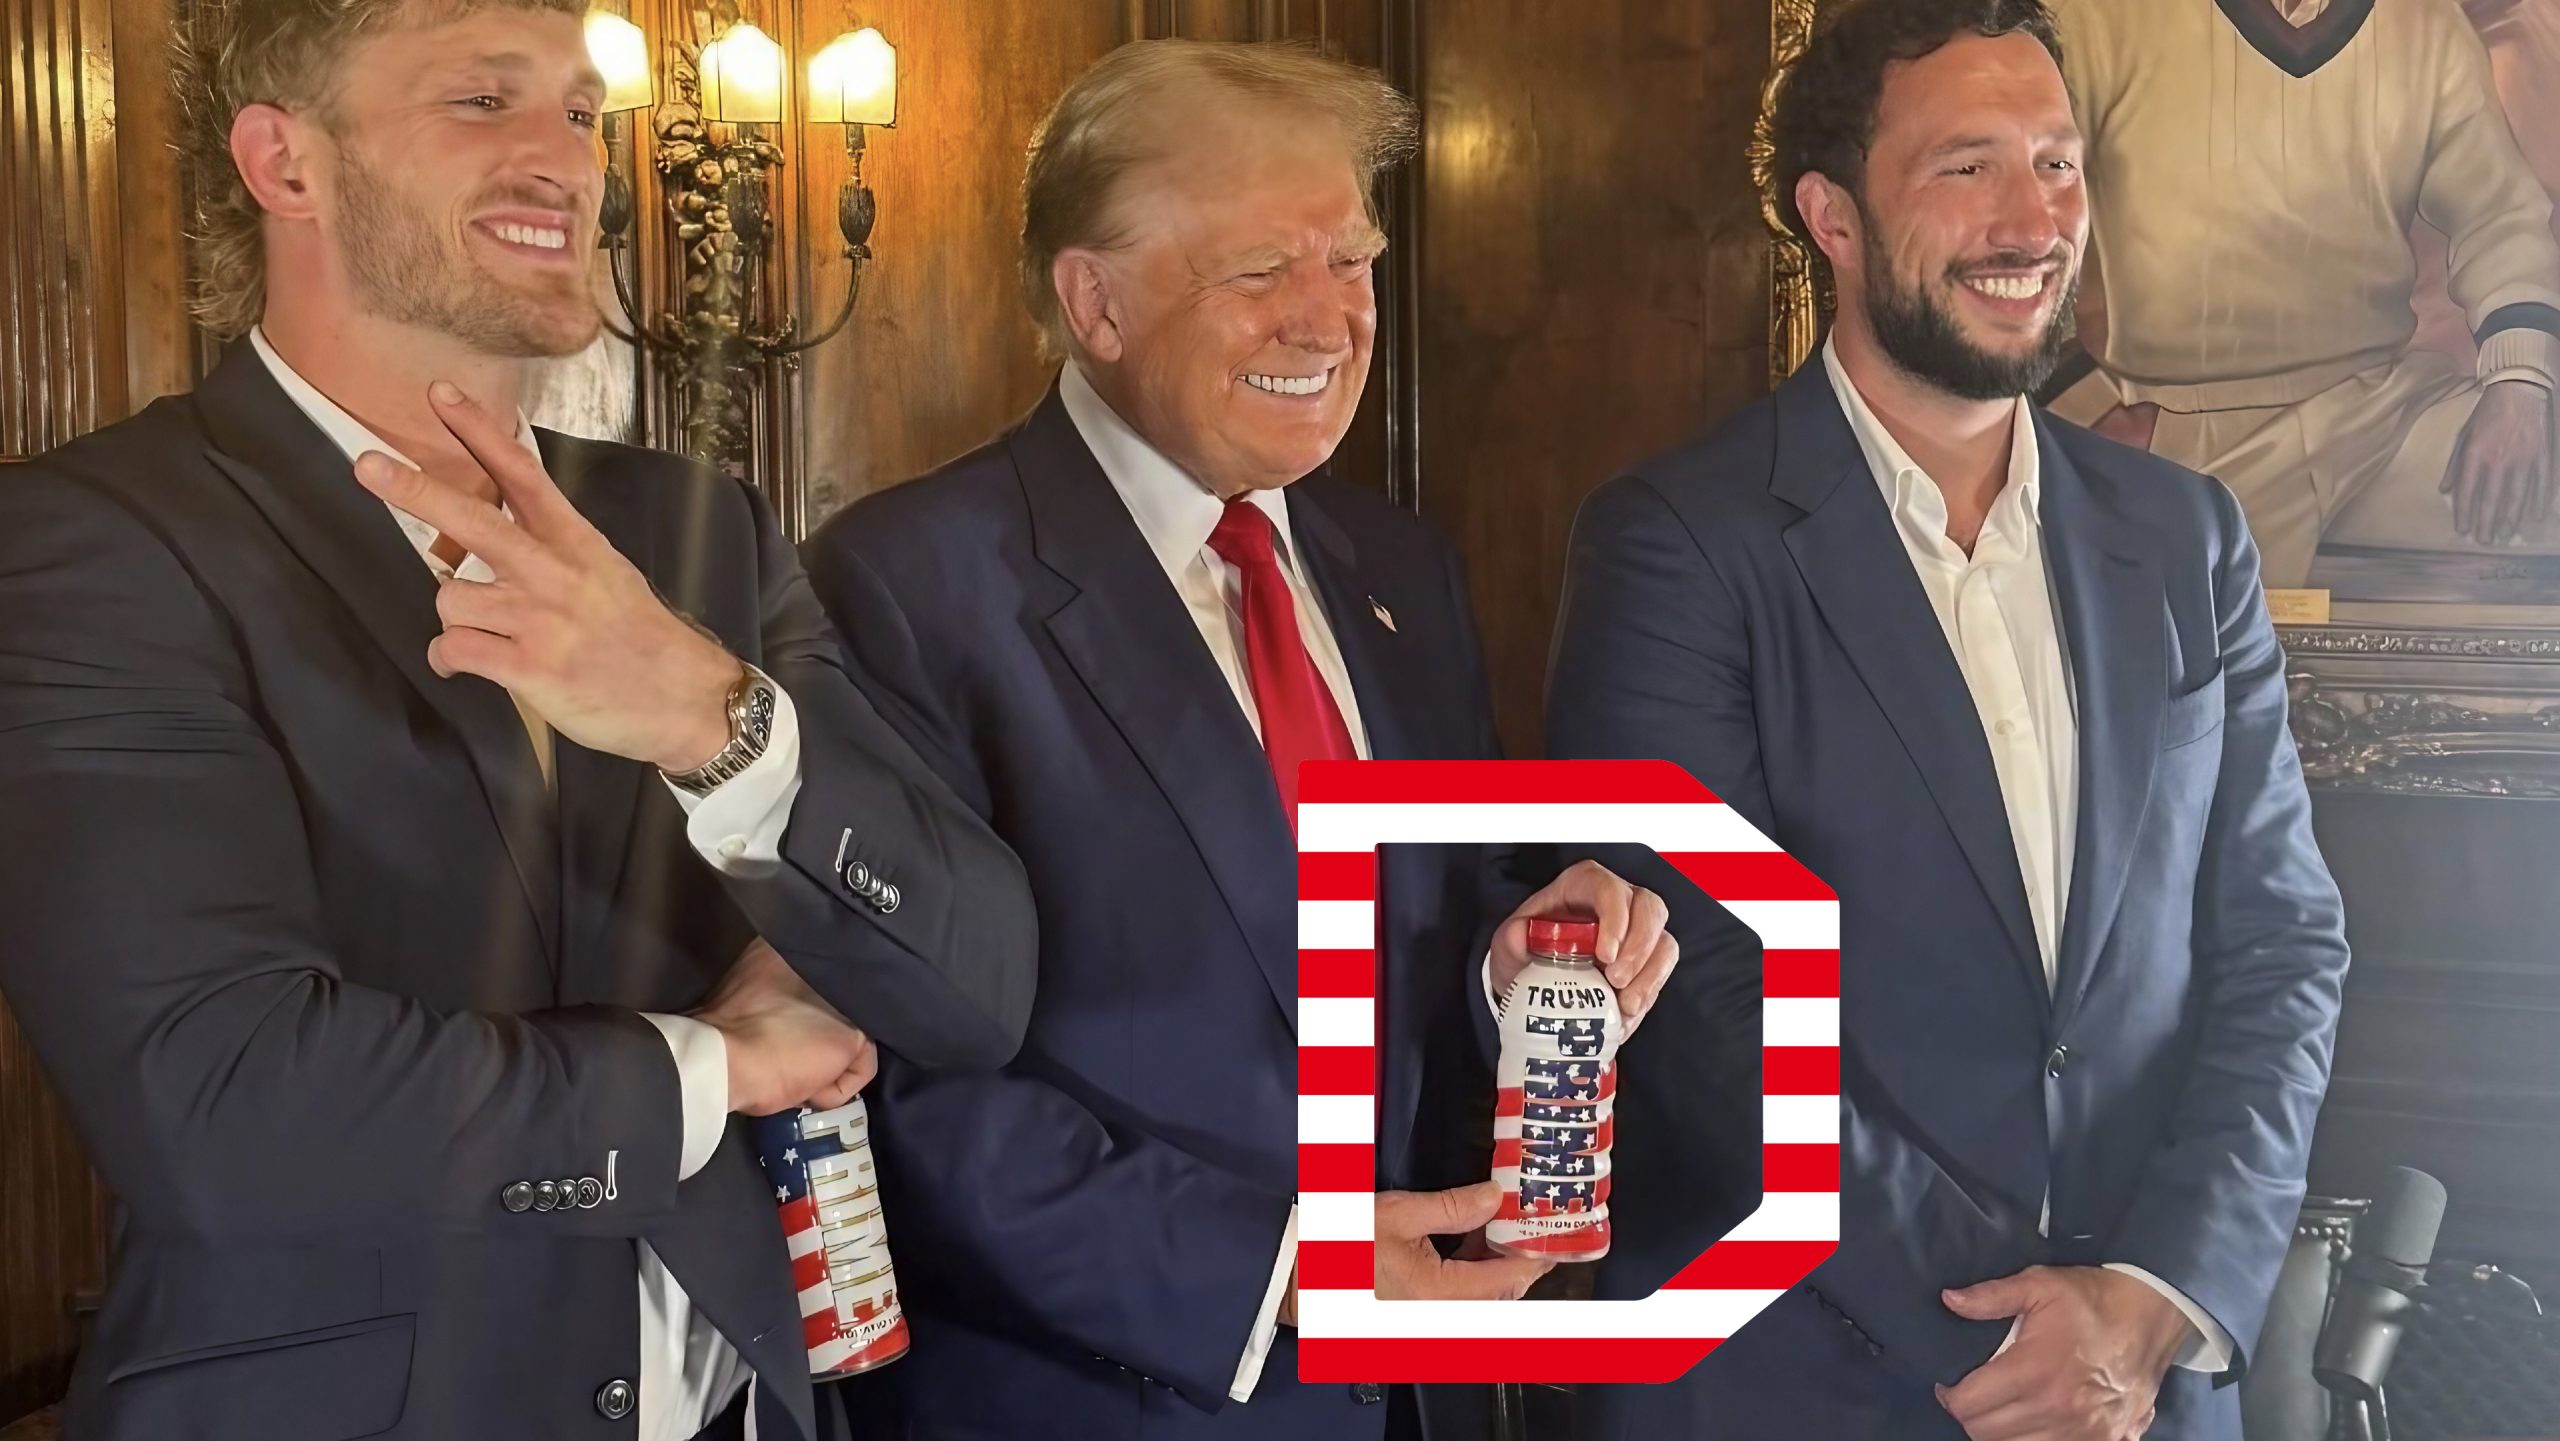 Prime Slapped Trump’s Name On a Bottle; Should the Brand Really Be Courting Trumpland?